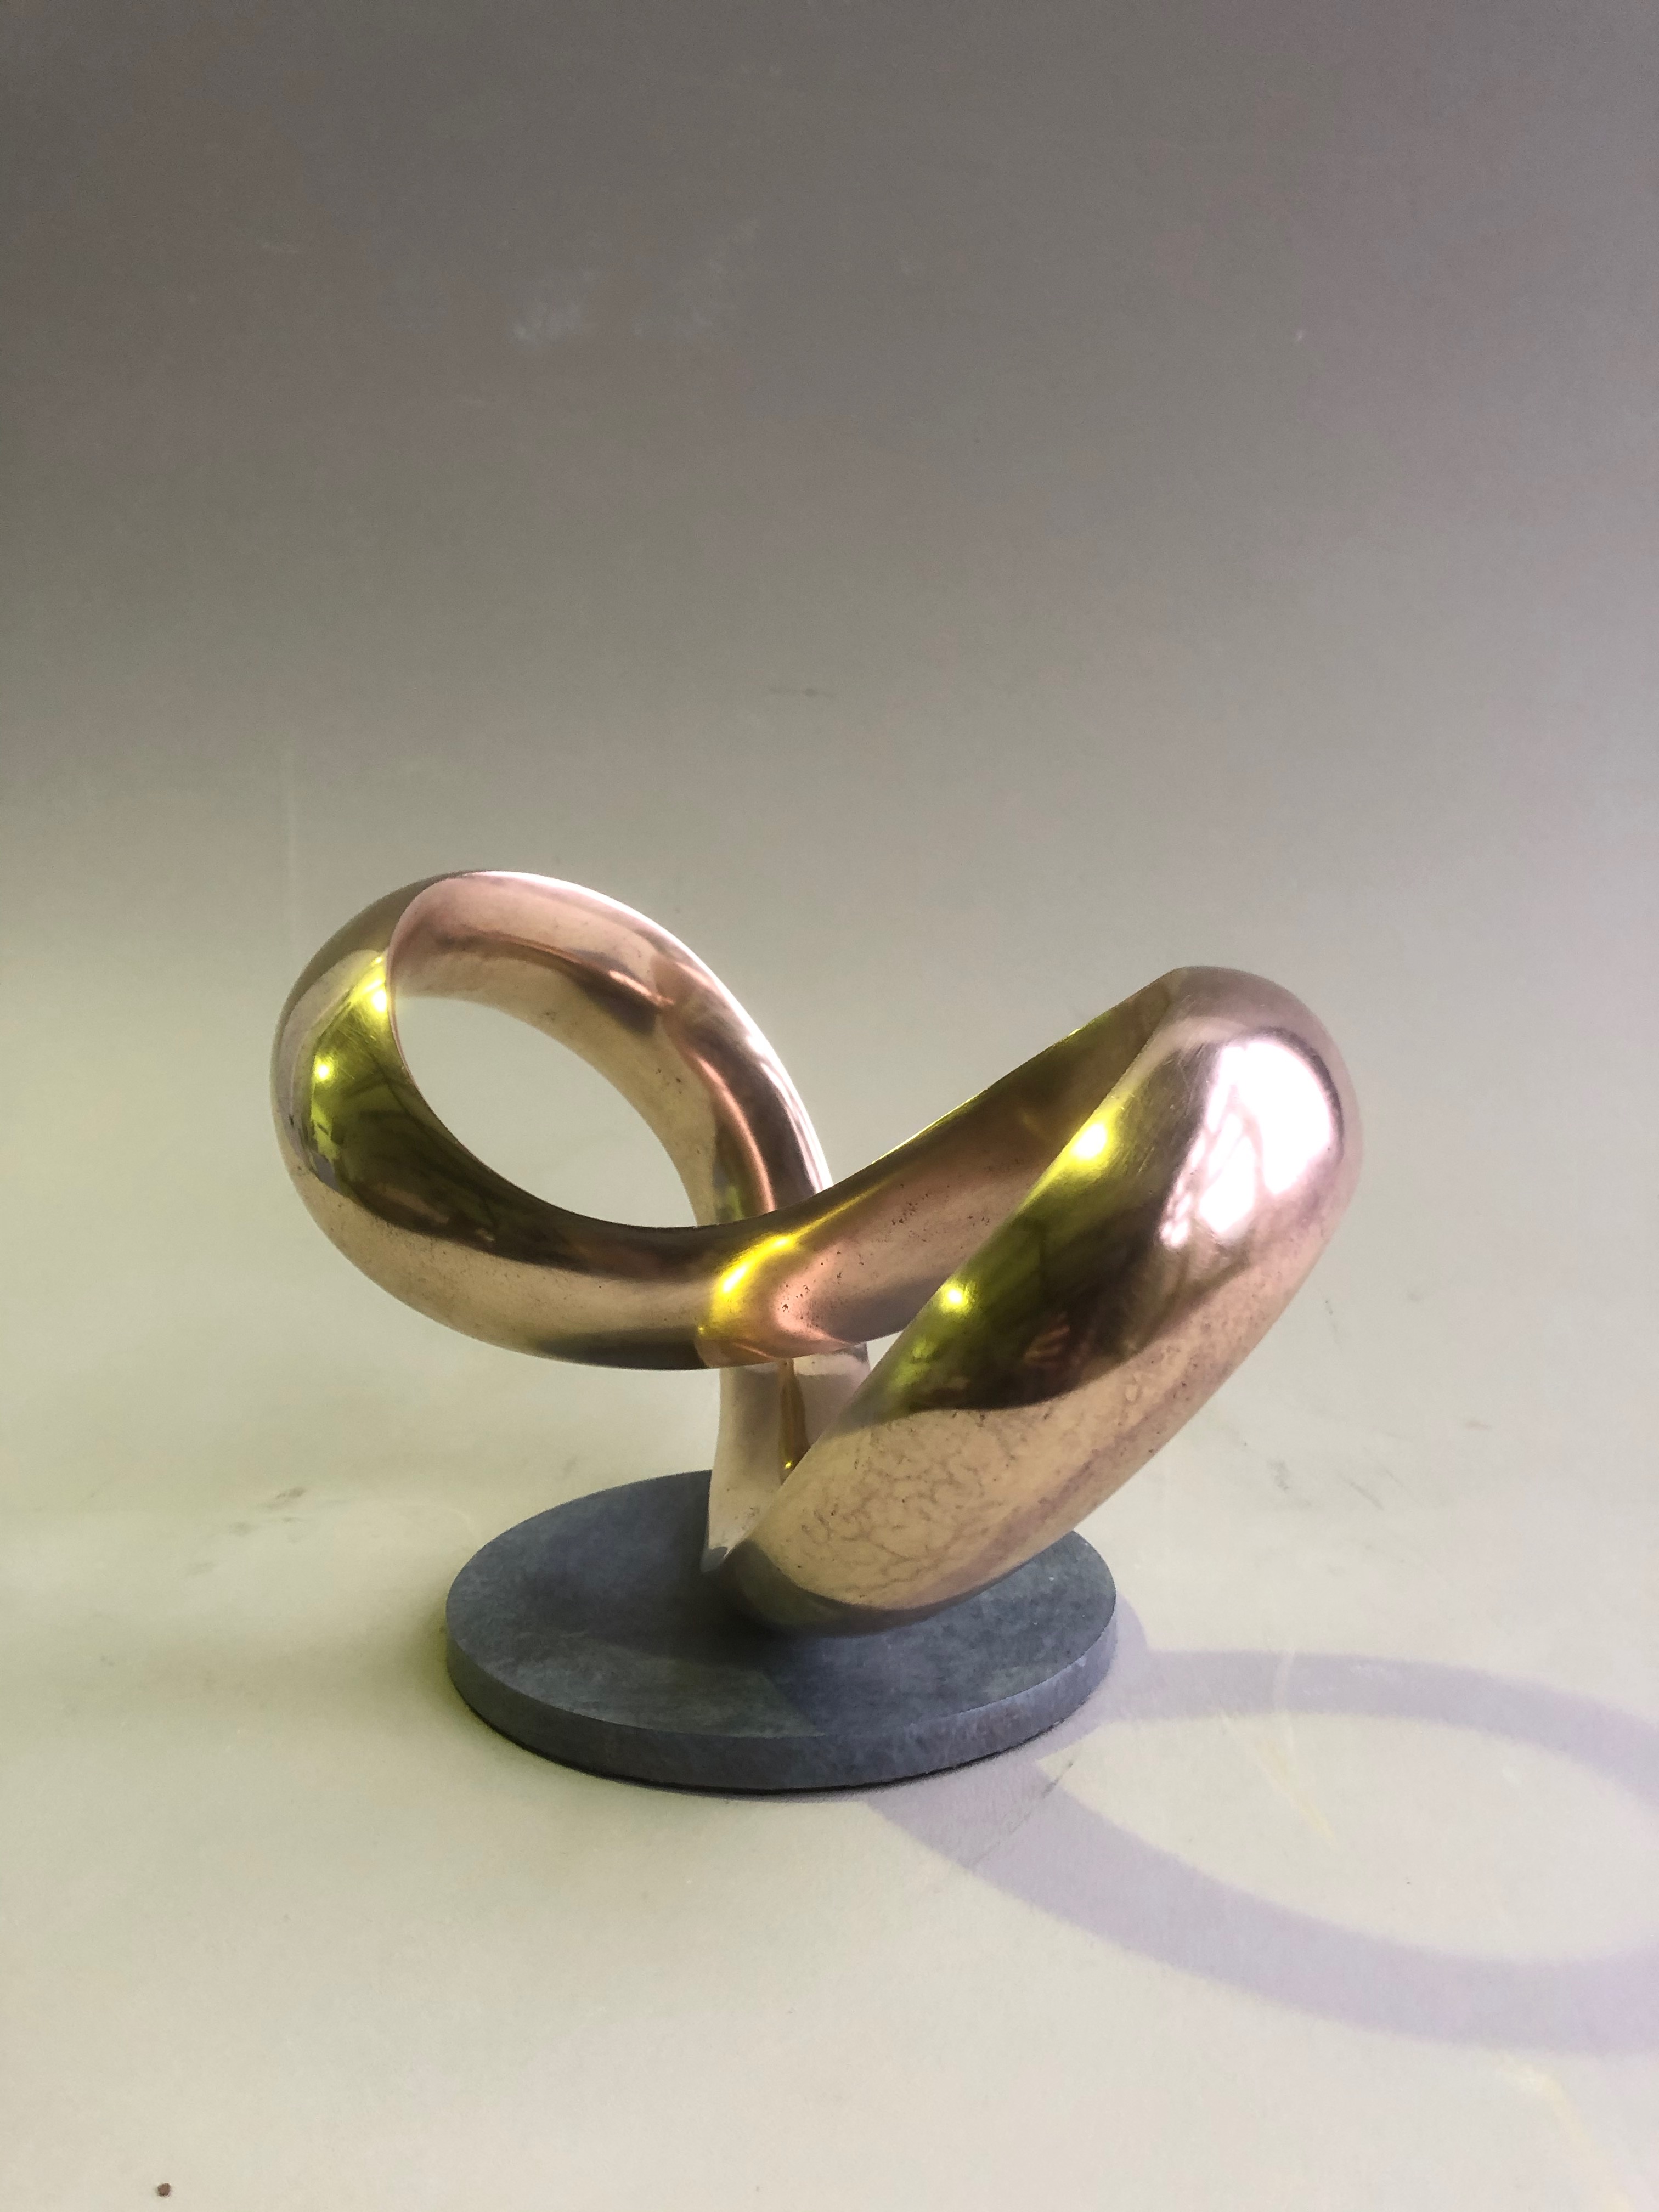 Moebius In Bronze VI. With polished finish rather than patination. 23 cm high ( not incl base ) x 27 cm